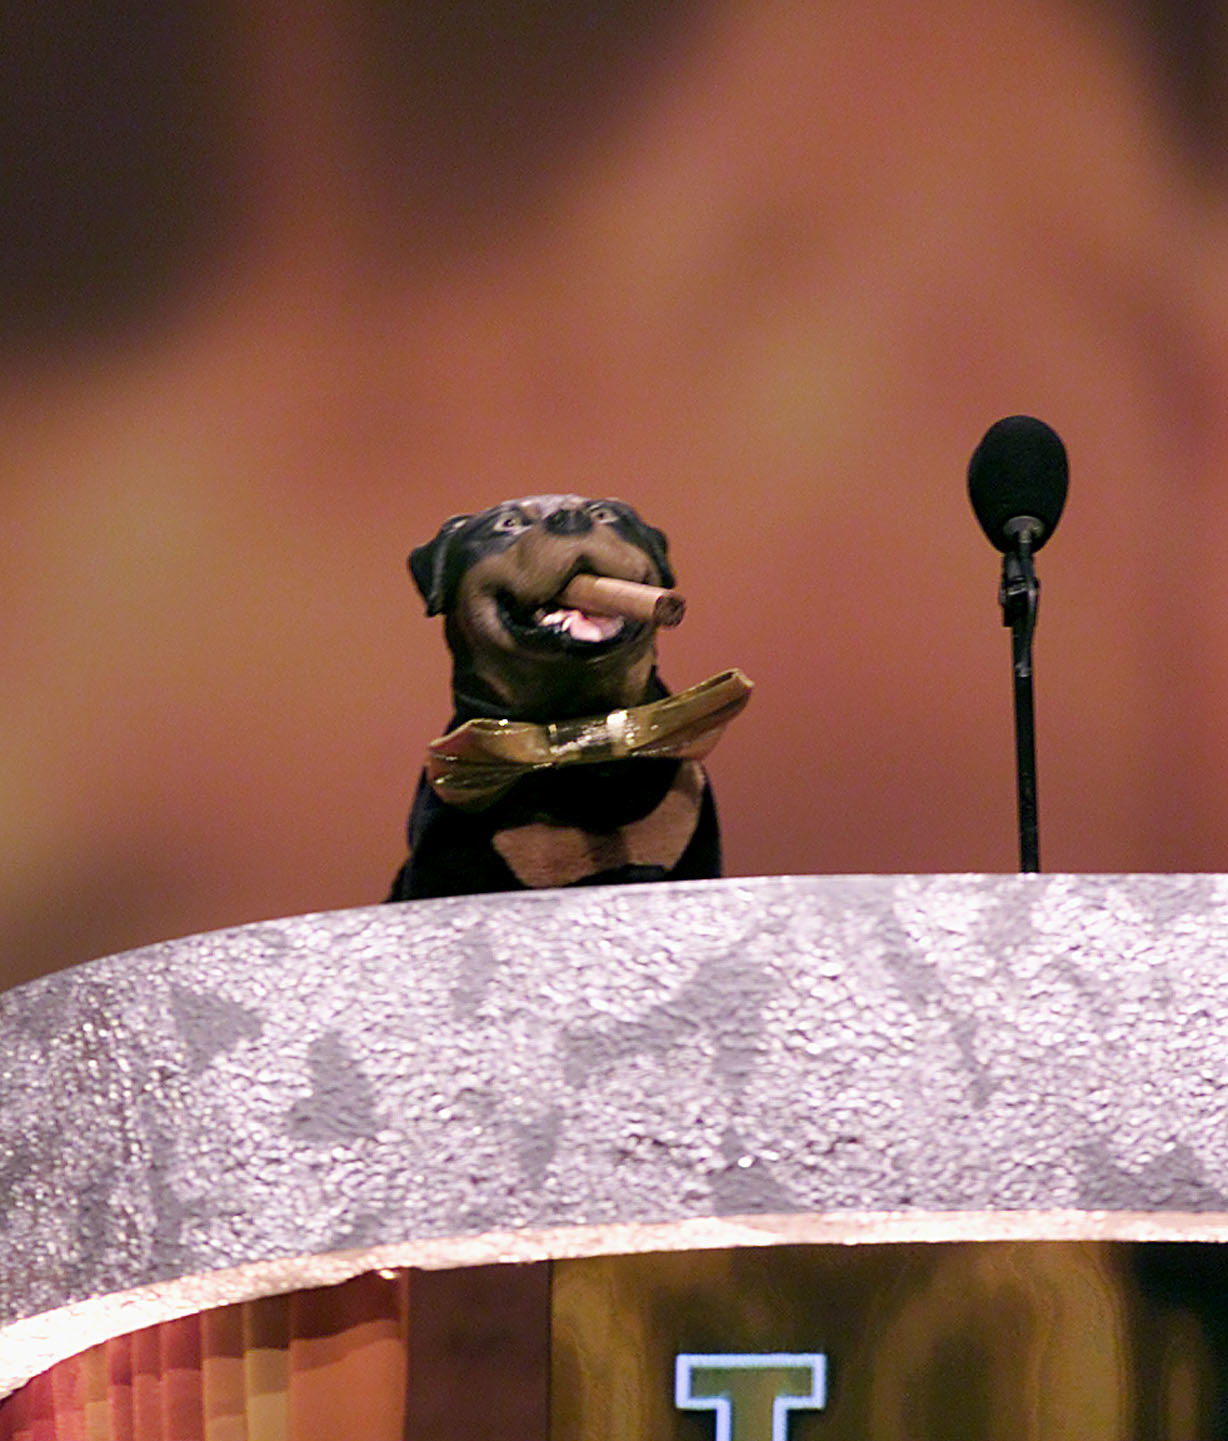 <p><span>He hasn't been back since the Rob Reiner "Roast," but Triumph the Insult Comic Dog is the perfect member of a roast dais. His entire life is a roast! Robert Smigel's creation zeroed in on his weight, but Triumph had a whole litter of fat jokes:</span></p><ul><li><span>"I'm actually sorry to see you showed up tonight — I won't be getting any table<br>scraps."</span></li><li><span>"You're like Orson Welles, without all that genius baggage"</span></li><li><span>"Even David Crosby thinks you've let yourself go!"</span></li></ul><p>There's so many wonderful Triumph jokes... for me to poop on.</p><p>You may also like: <a href='https://www.yardbarker.com/entertainment/articles/the_25_most_devastating_endings_in_film_history_112823/s1__35694233'>The 25 most devastating endings in film history</a></p>